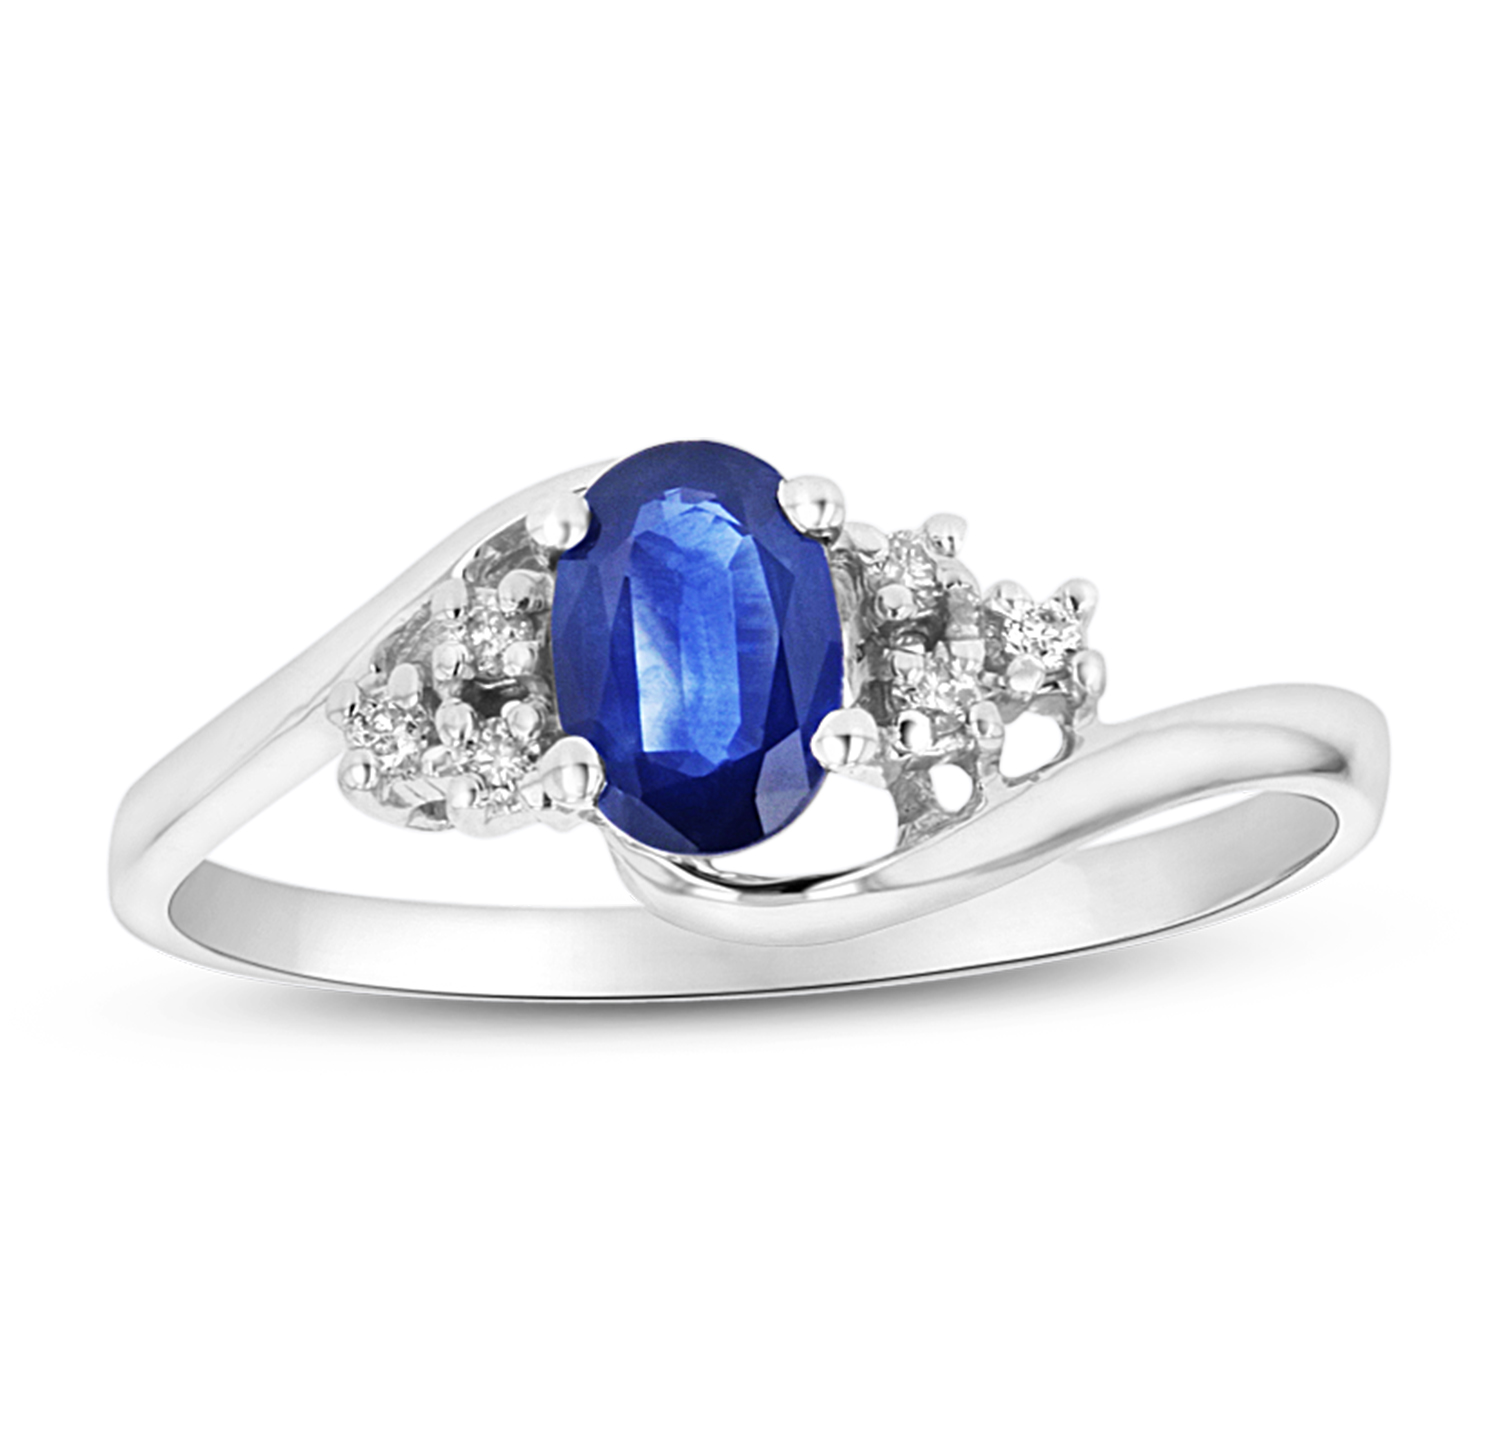 Sapphire and Diamond Fashion Ring set in 14k Gold